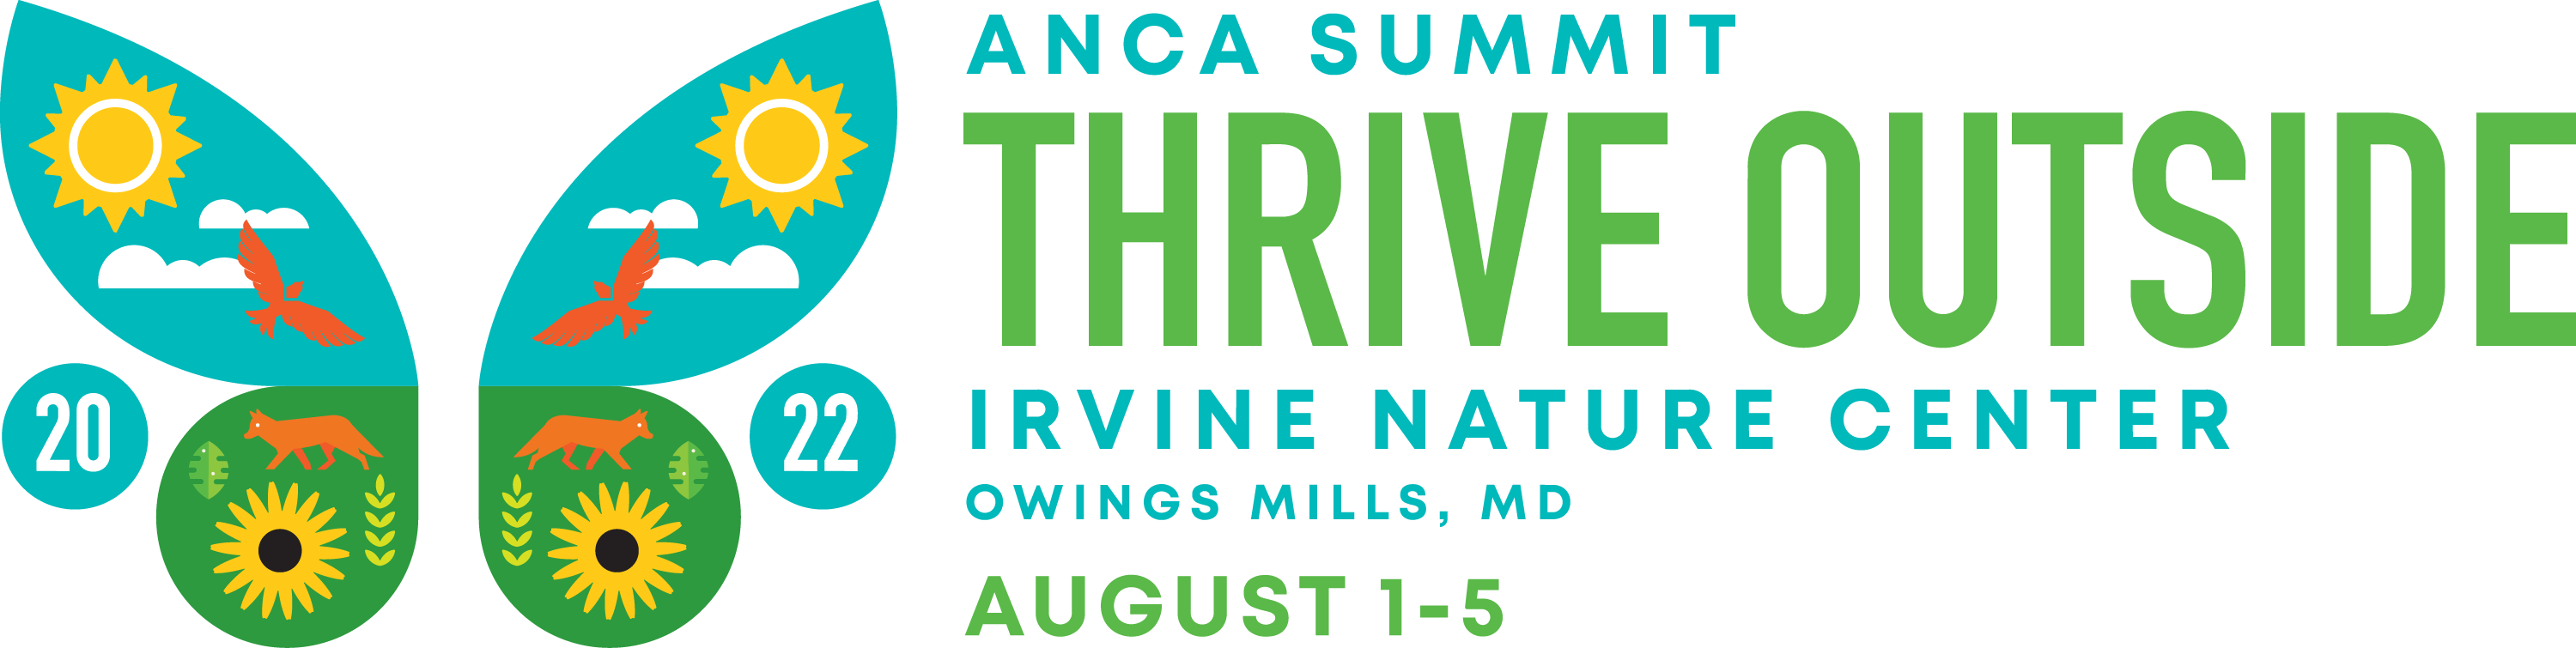 ANCA Summit: Thrive Outside | Irvine Nature Center in Owings Mills, Md | August 1-5